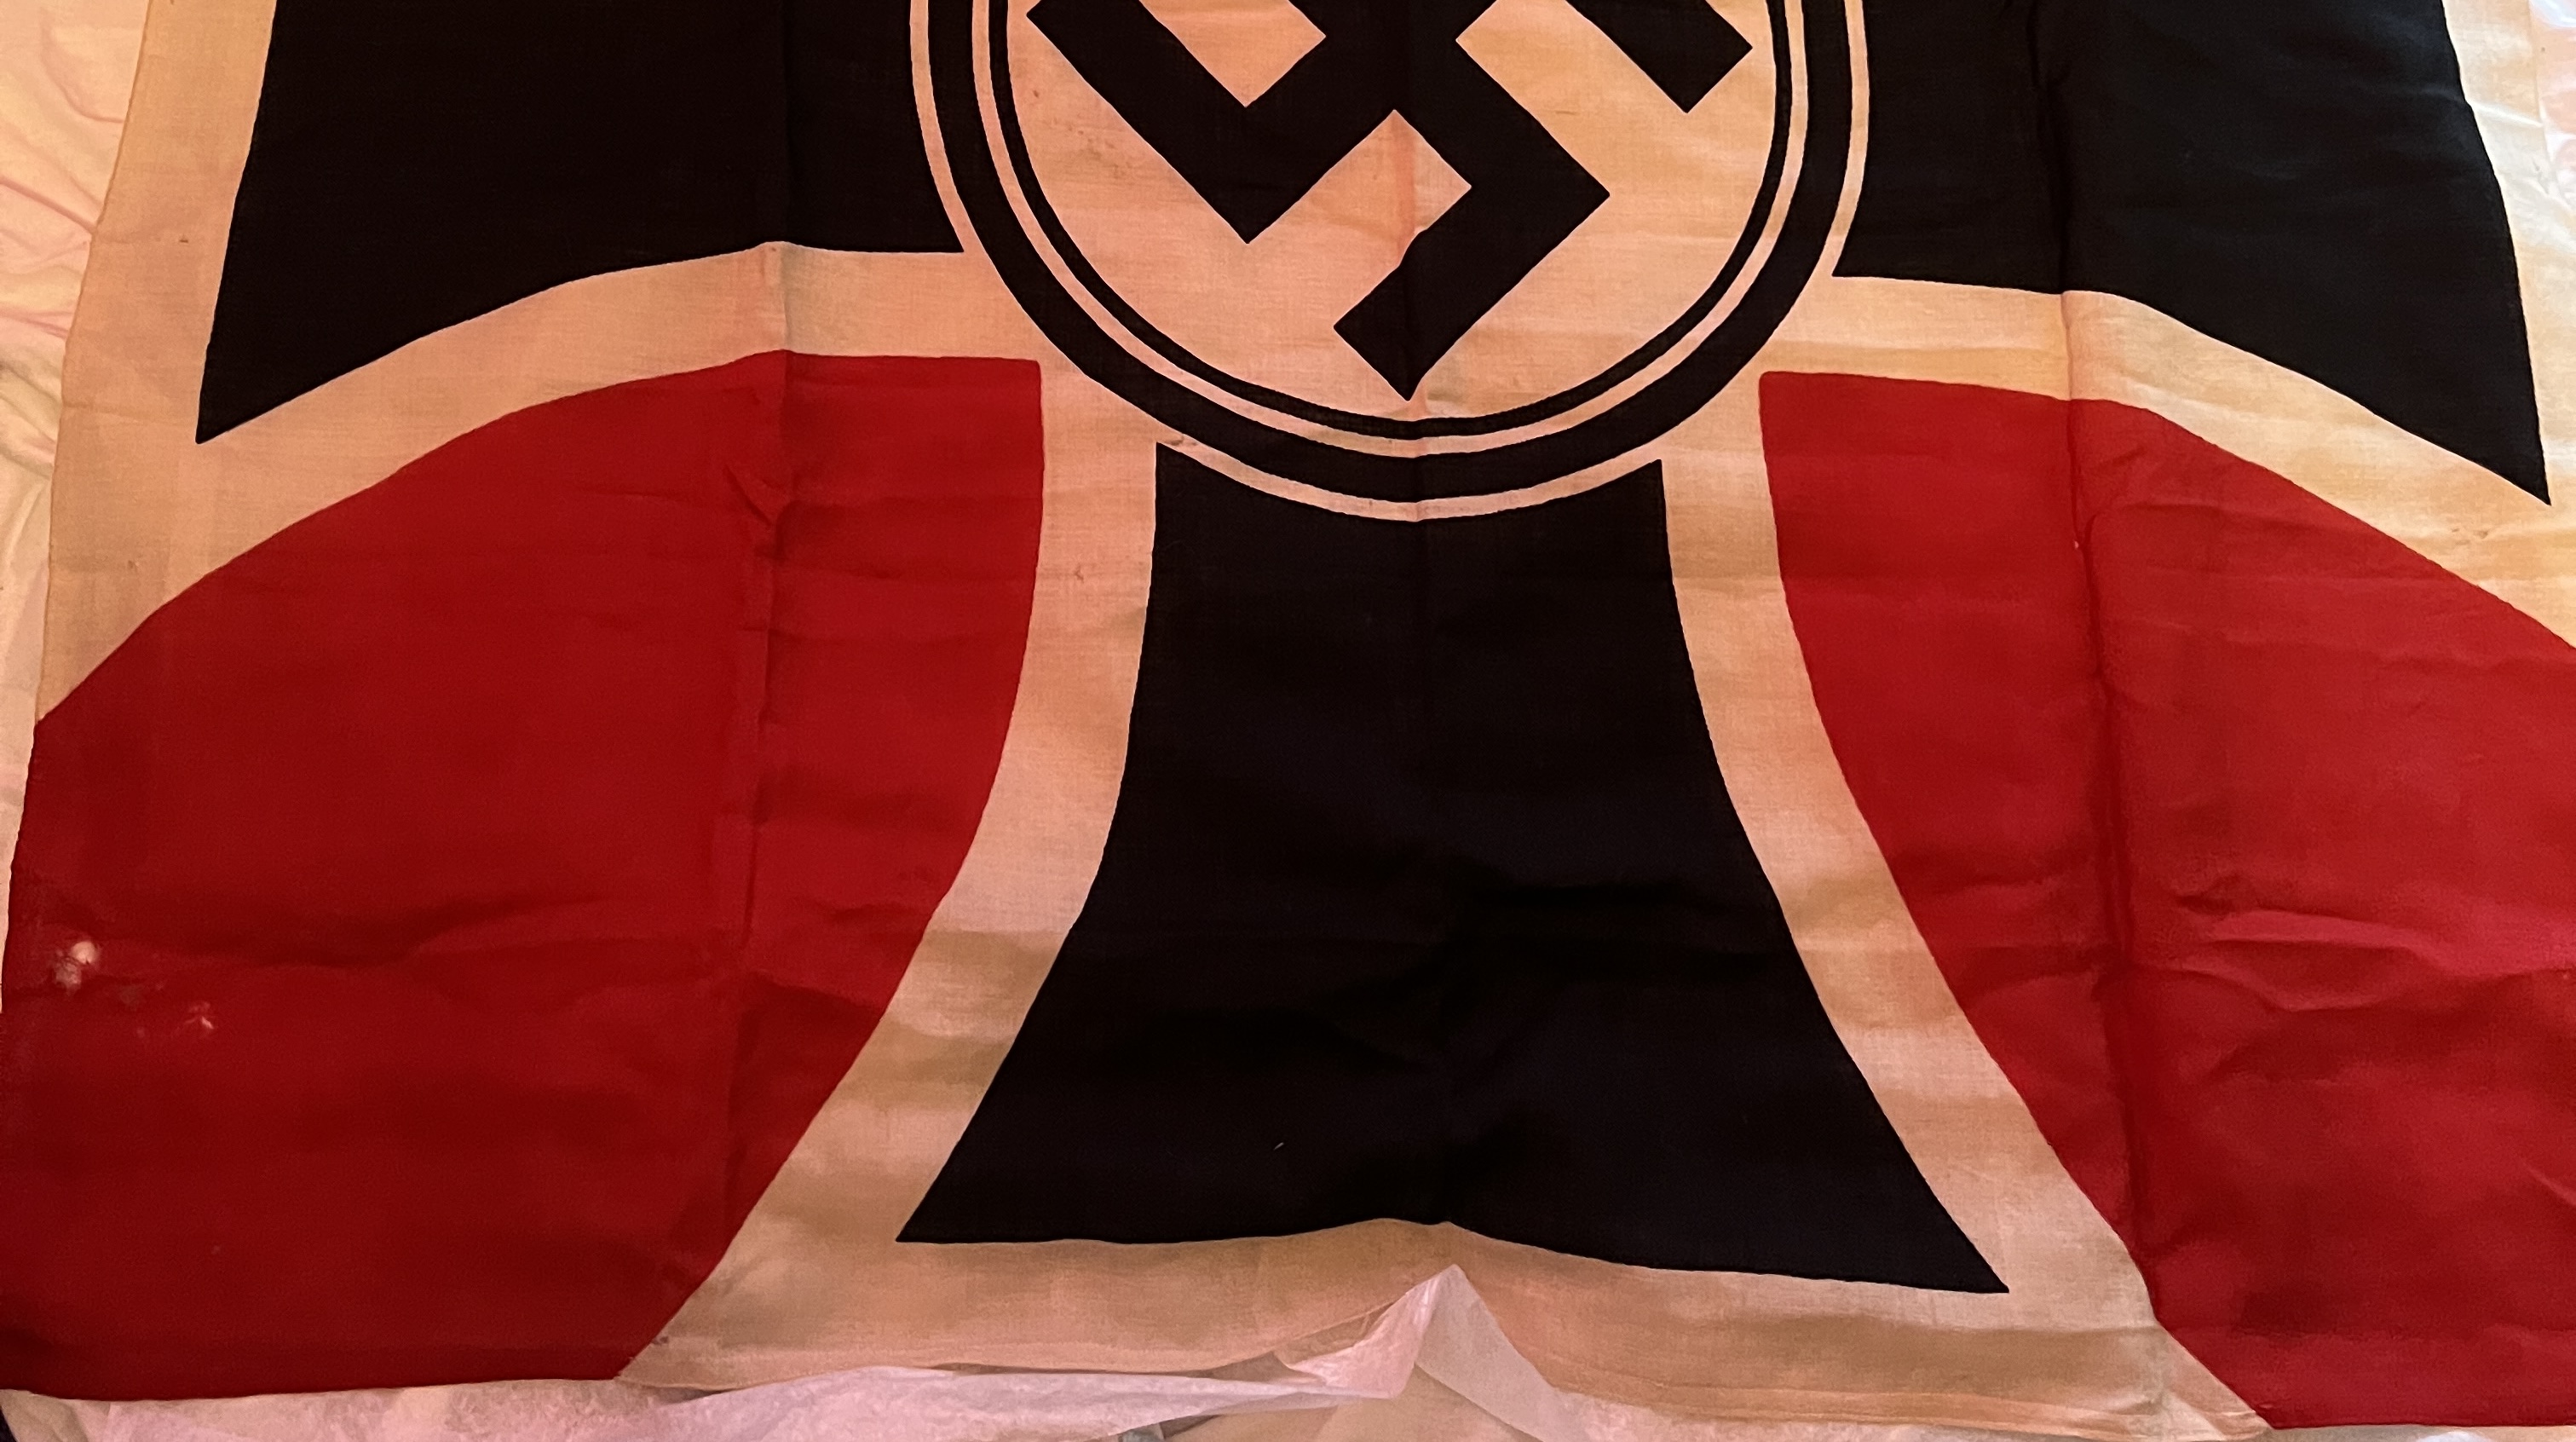 black swastika on white field within black Iron Cross upon red background